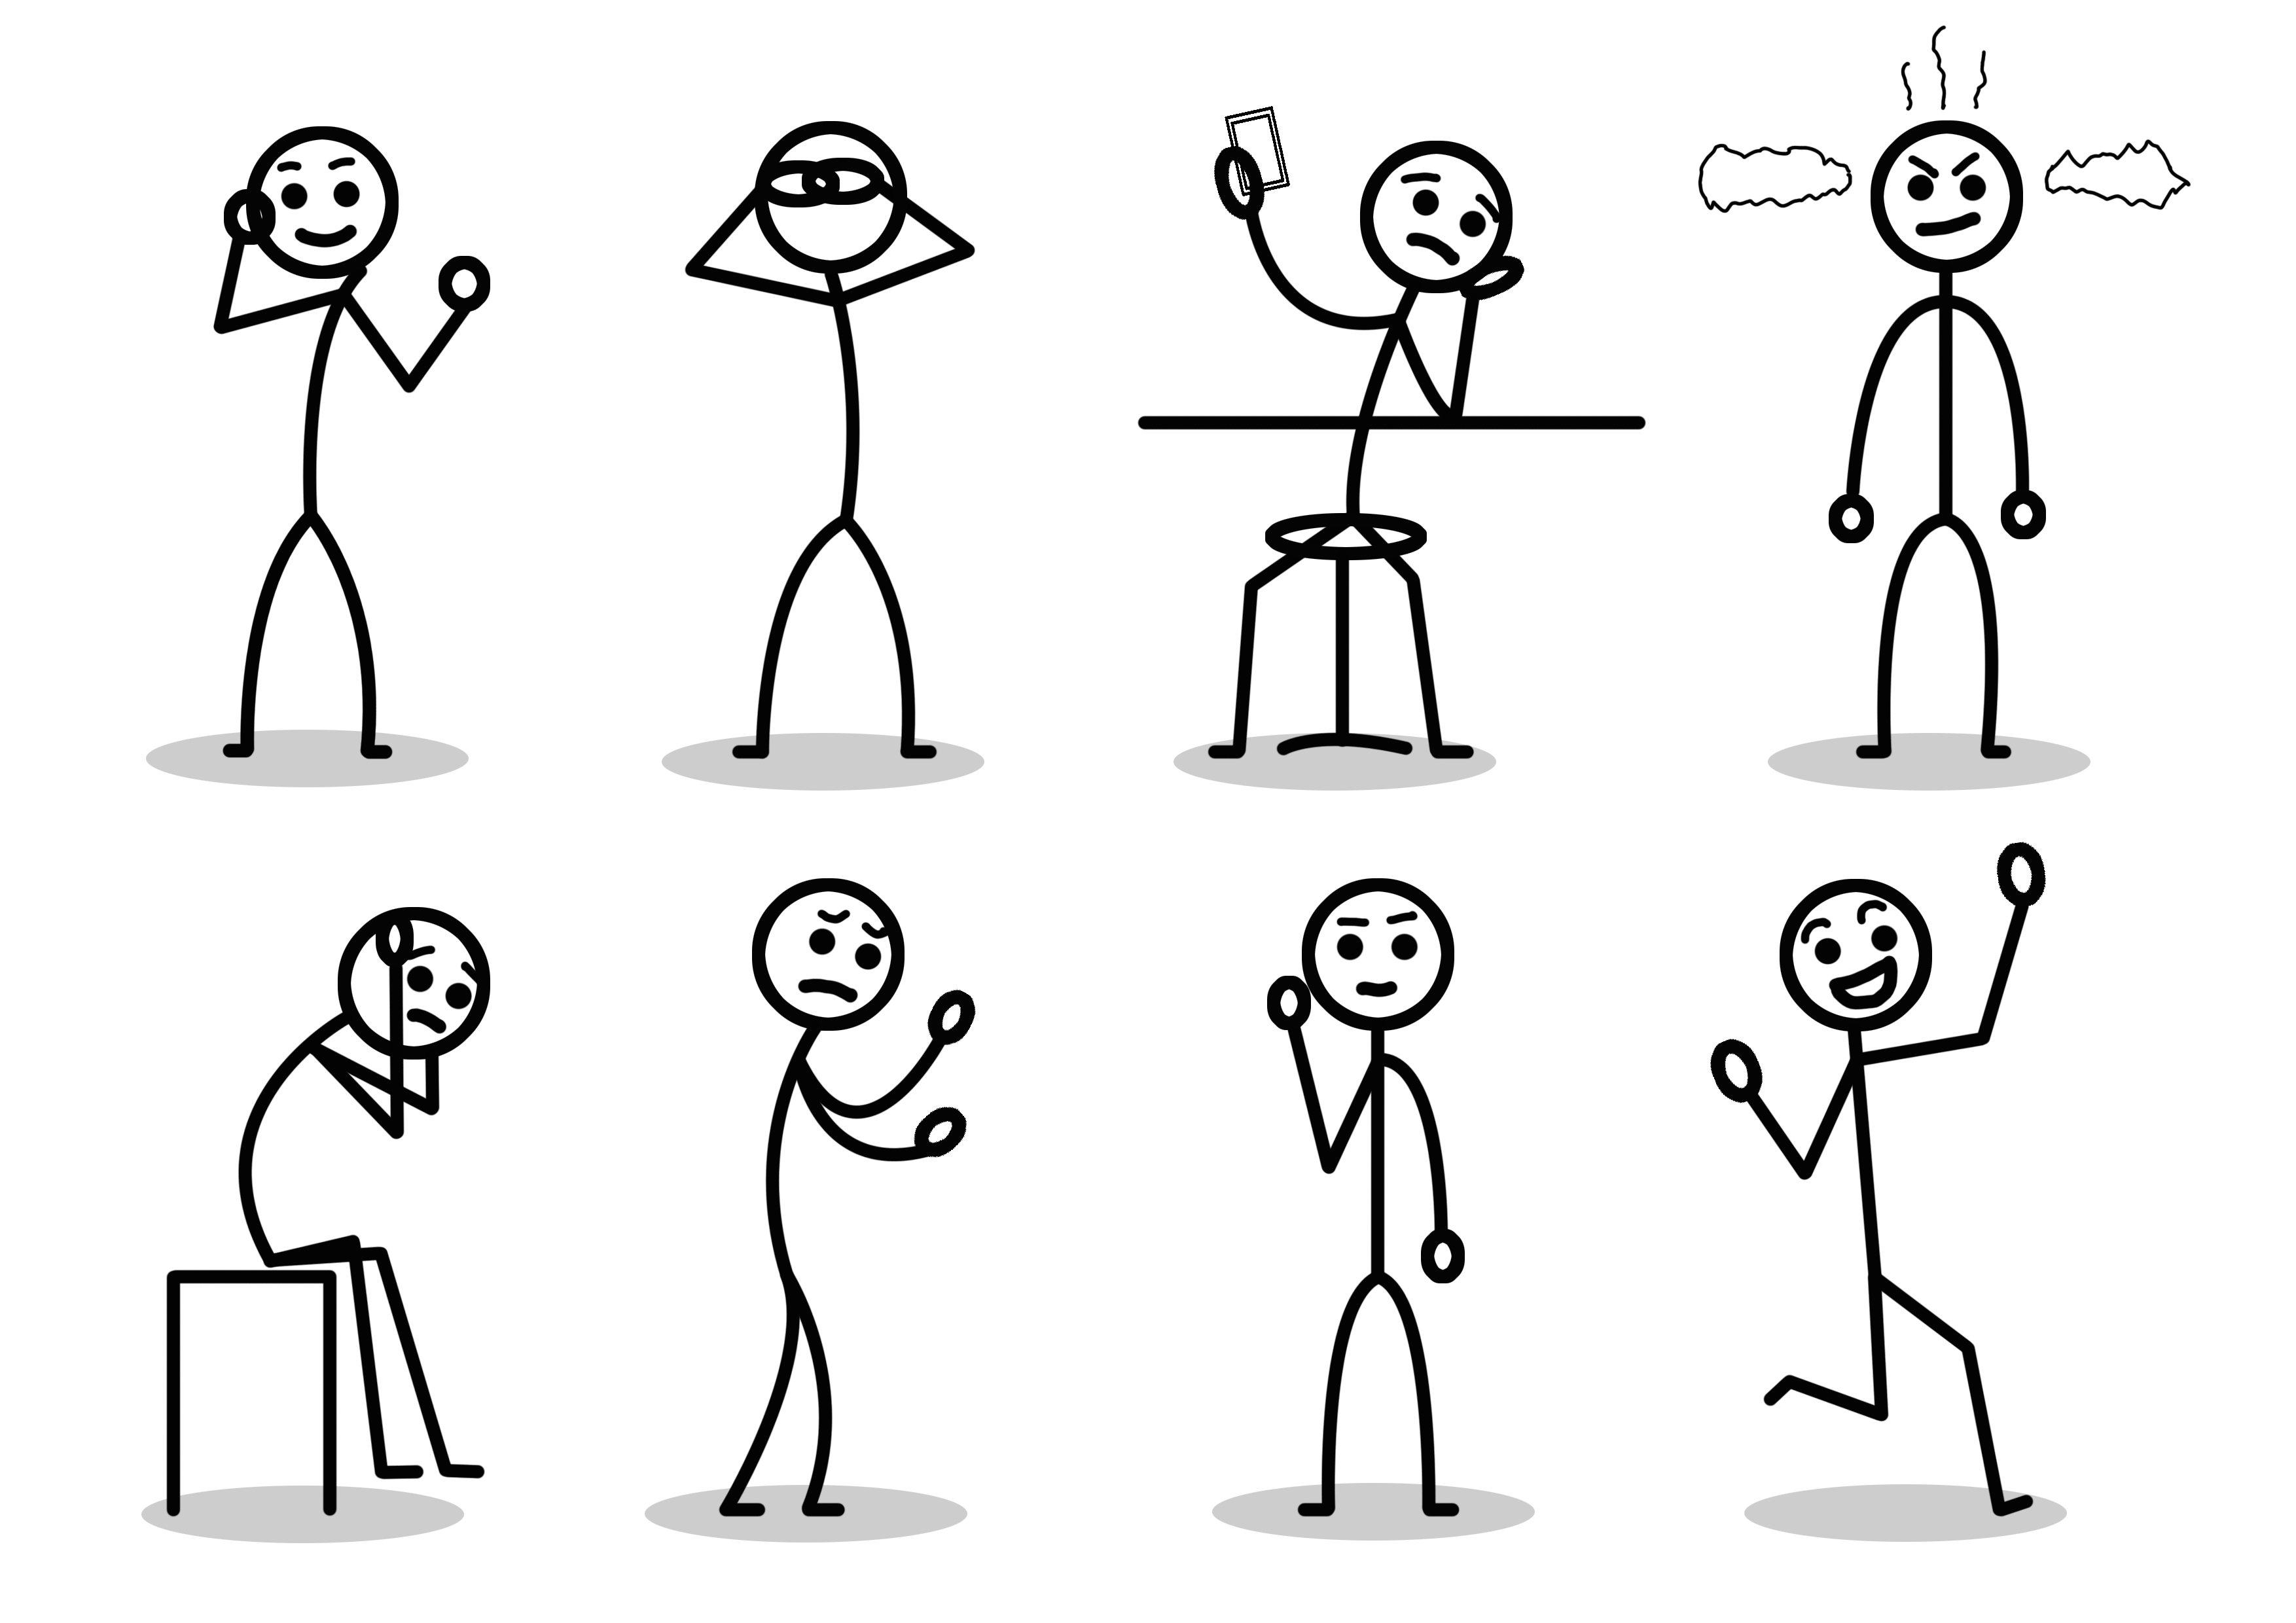 Draw a high quality and unique stickman stick figure clipart by Ryant92